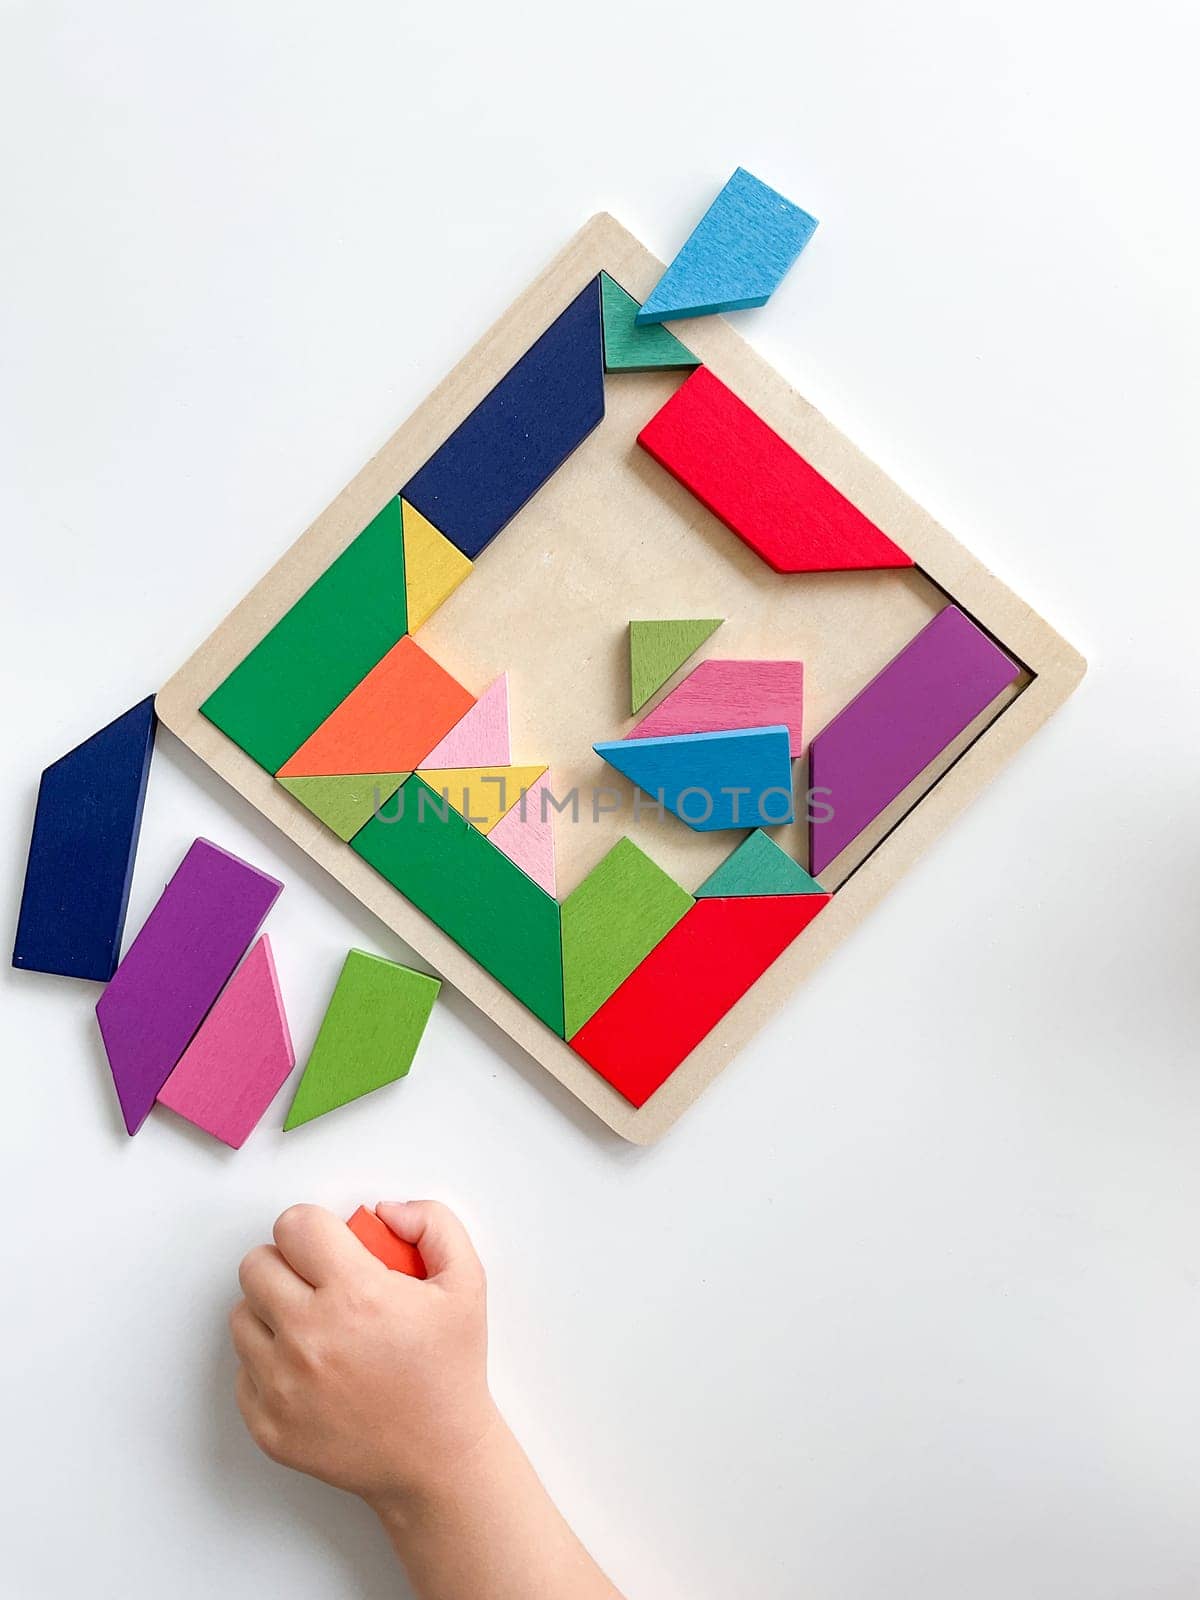 childs hand collects multicolored wooden mosaic on white background. by Lunnica